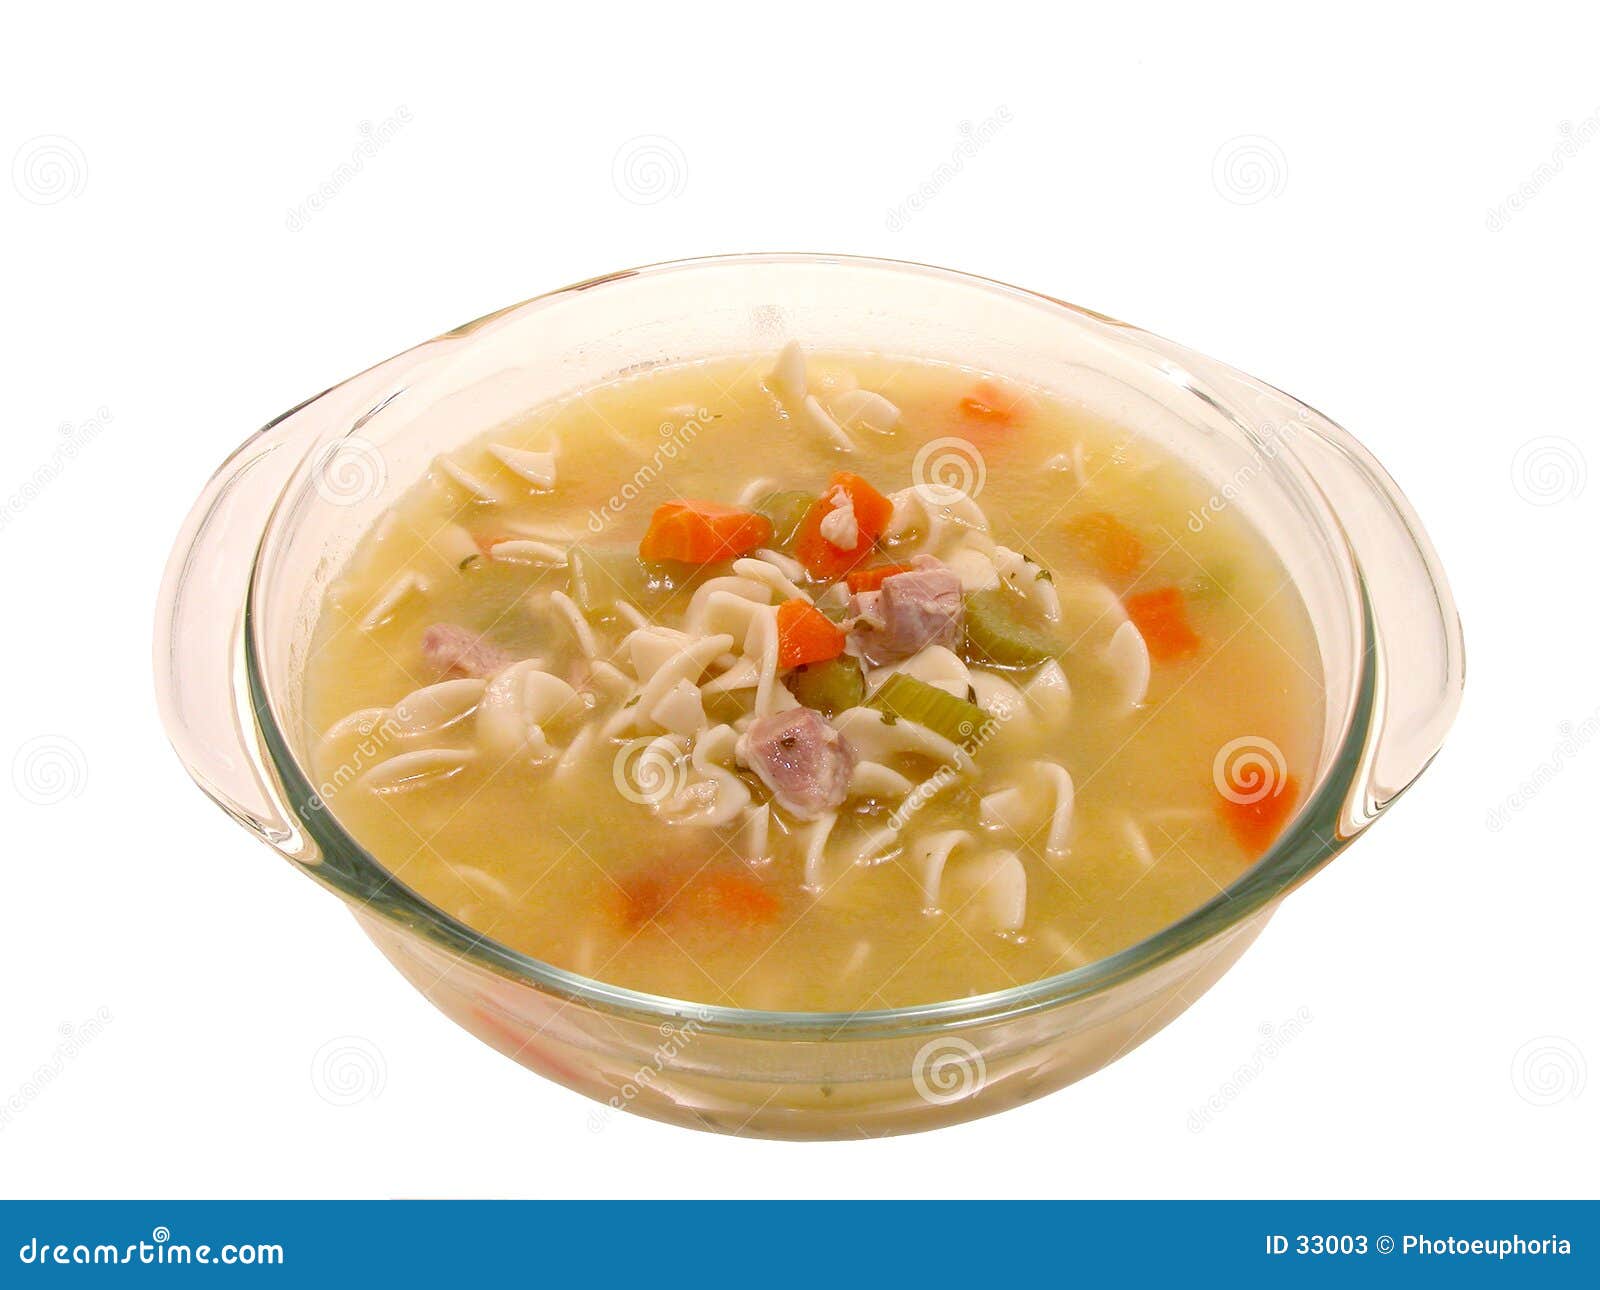 food: chunky chicken noodle soup in glass cooking dish